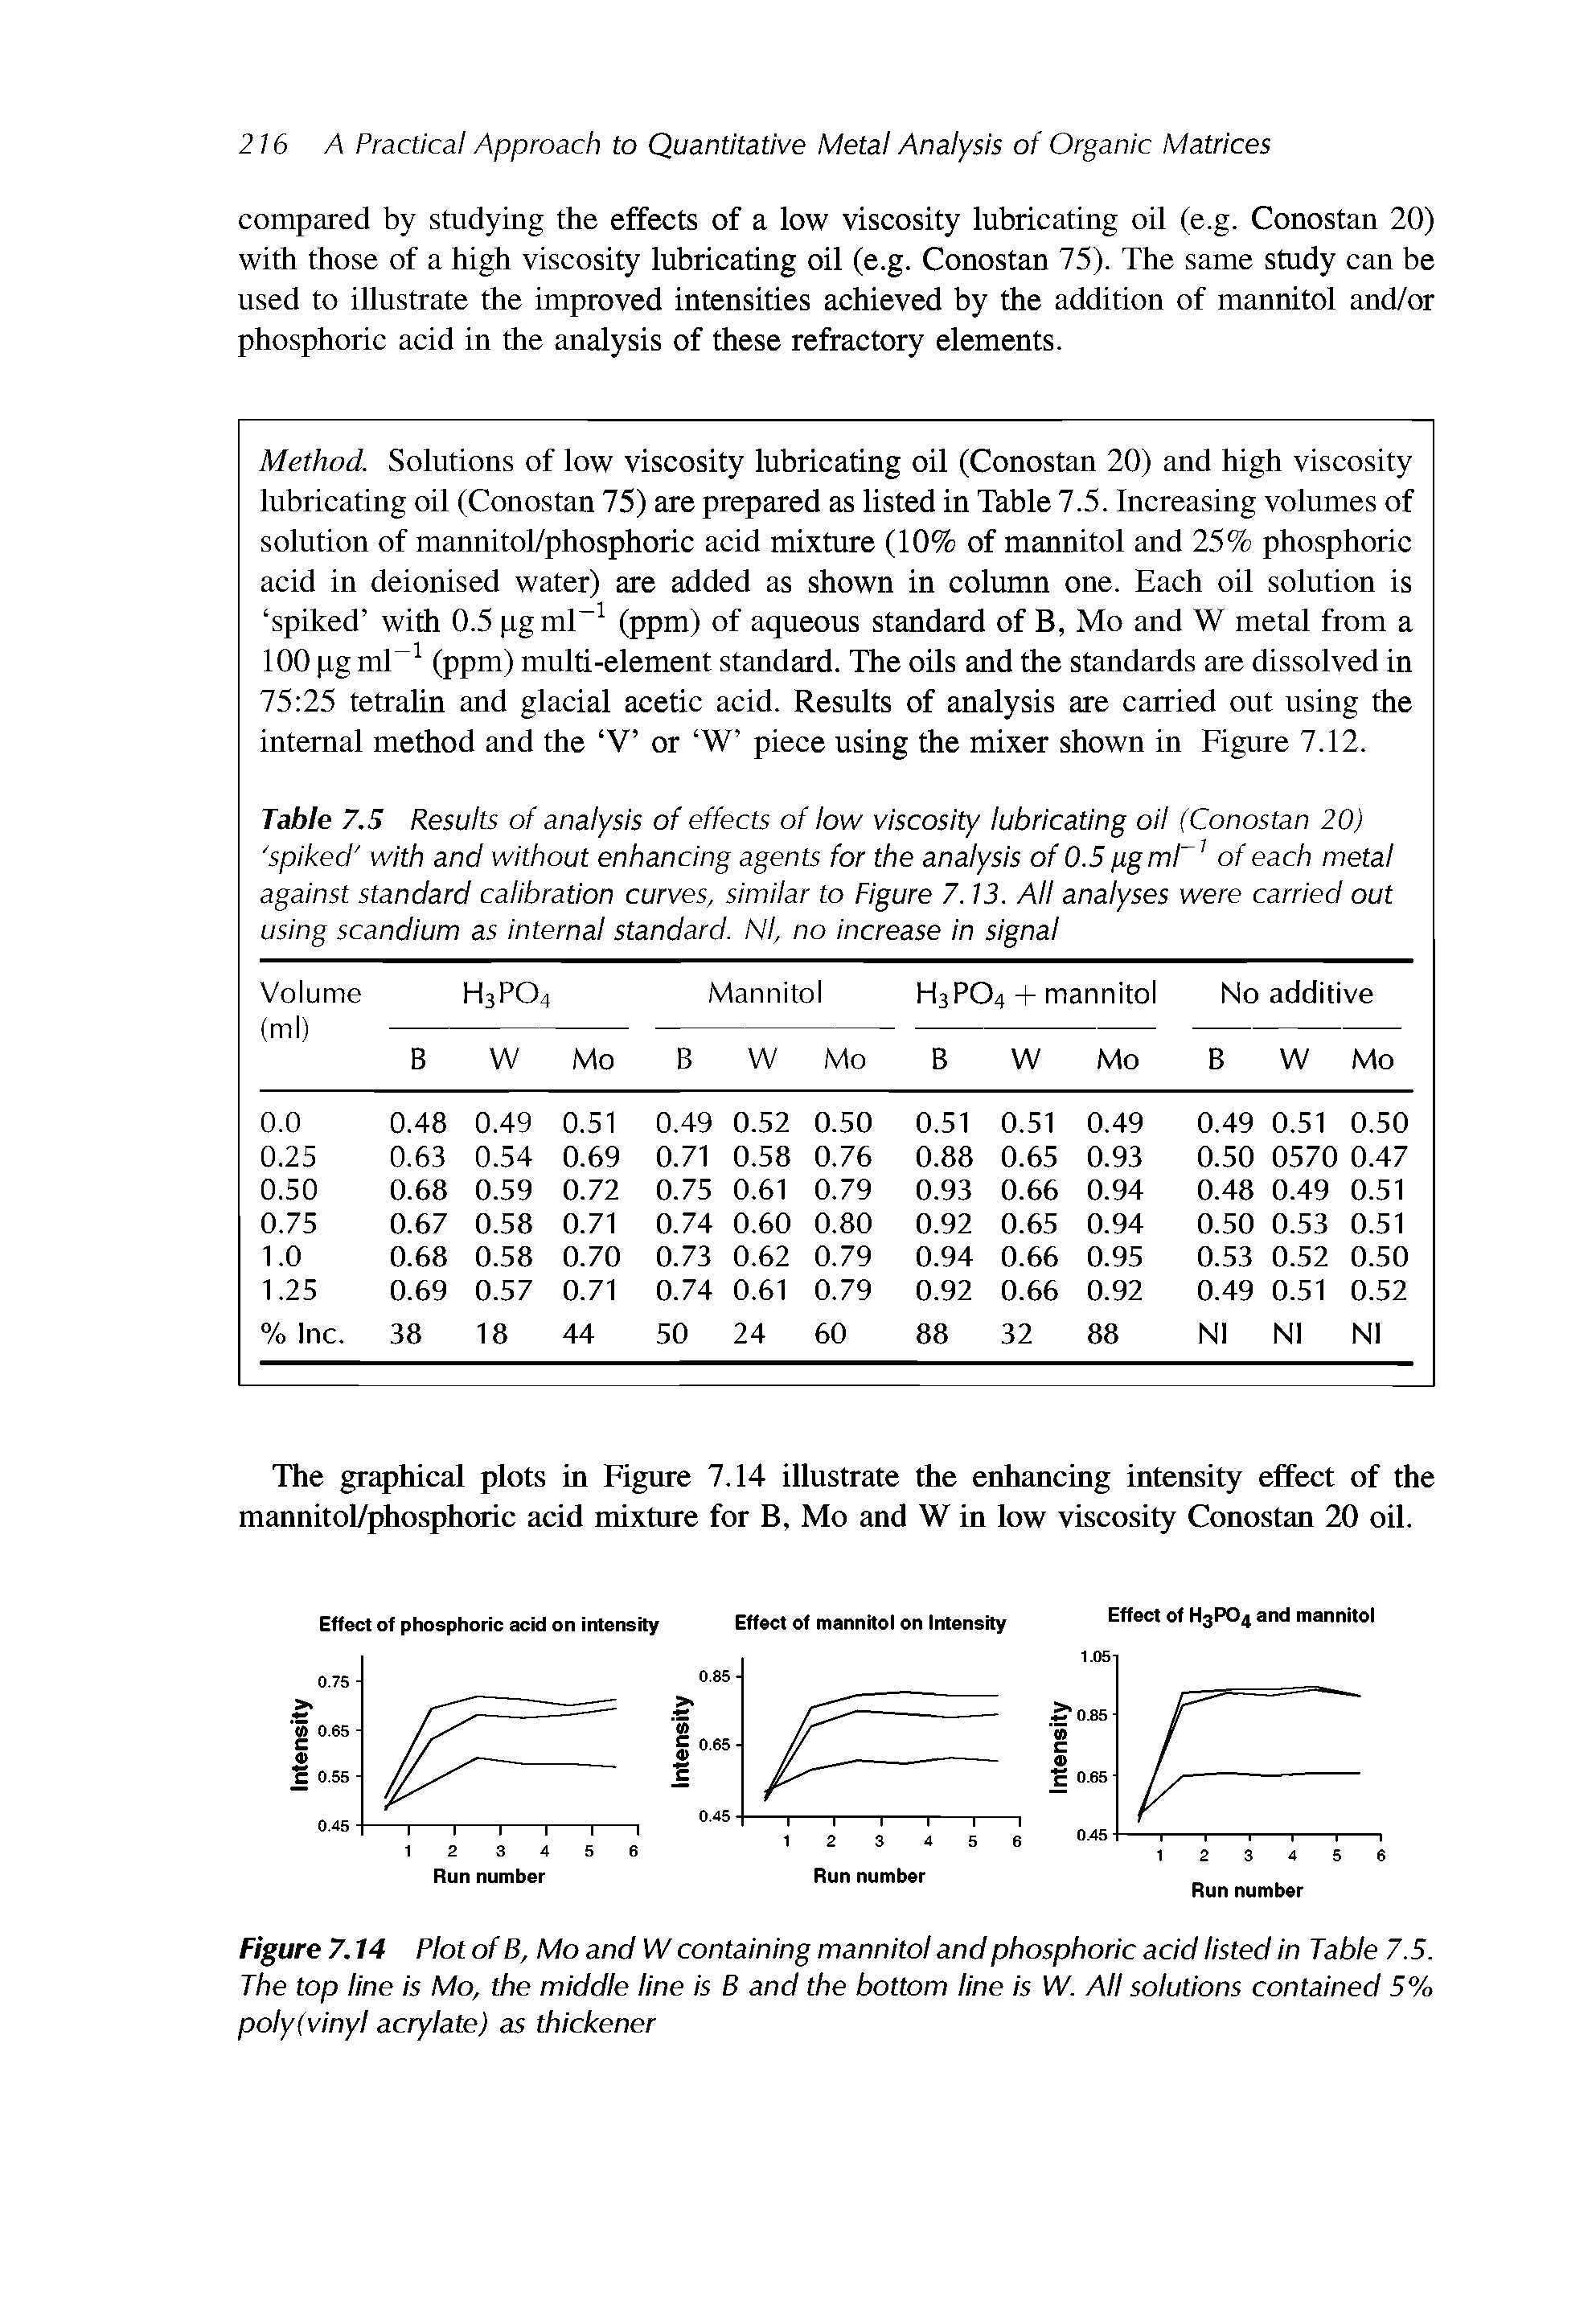 Table 7.5 Results of analysis of effects of low viscosity lubricating oil (Conostan 20) spiked with and without enhancing agents for the analysis of 0.5 (igmC1 of each metal against standard calibration curves, similar to Figure 7.13. All analyses were carried out using scandium as internal standard. Nl, no increase in signal...